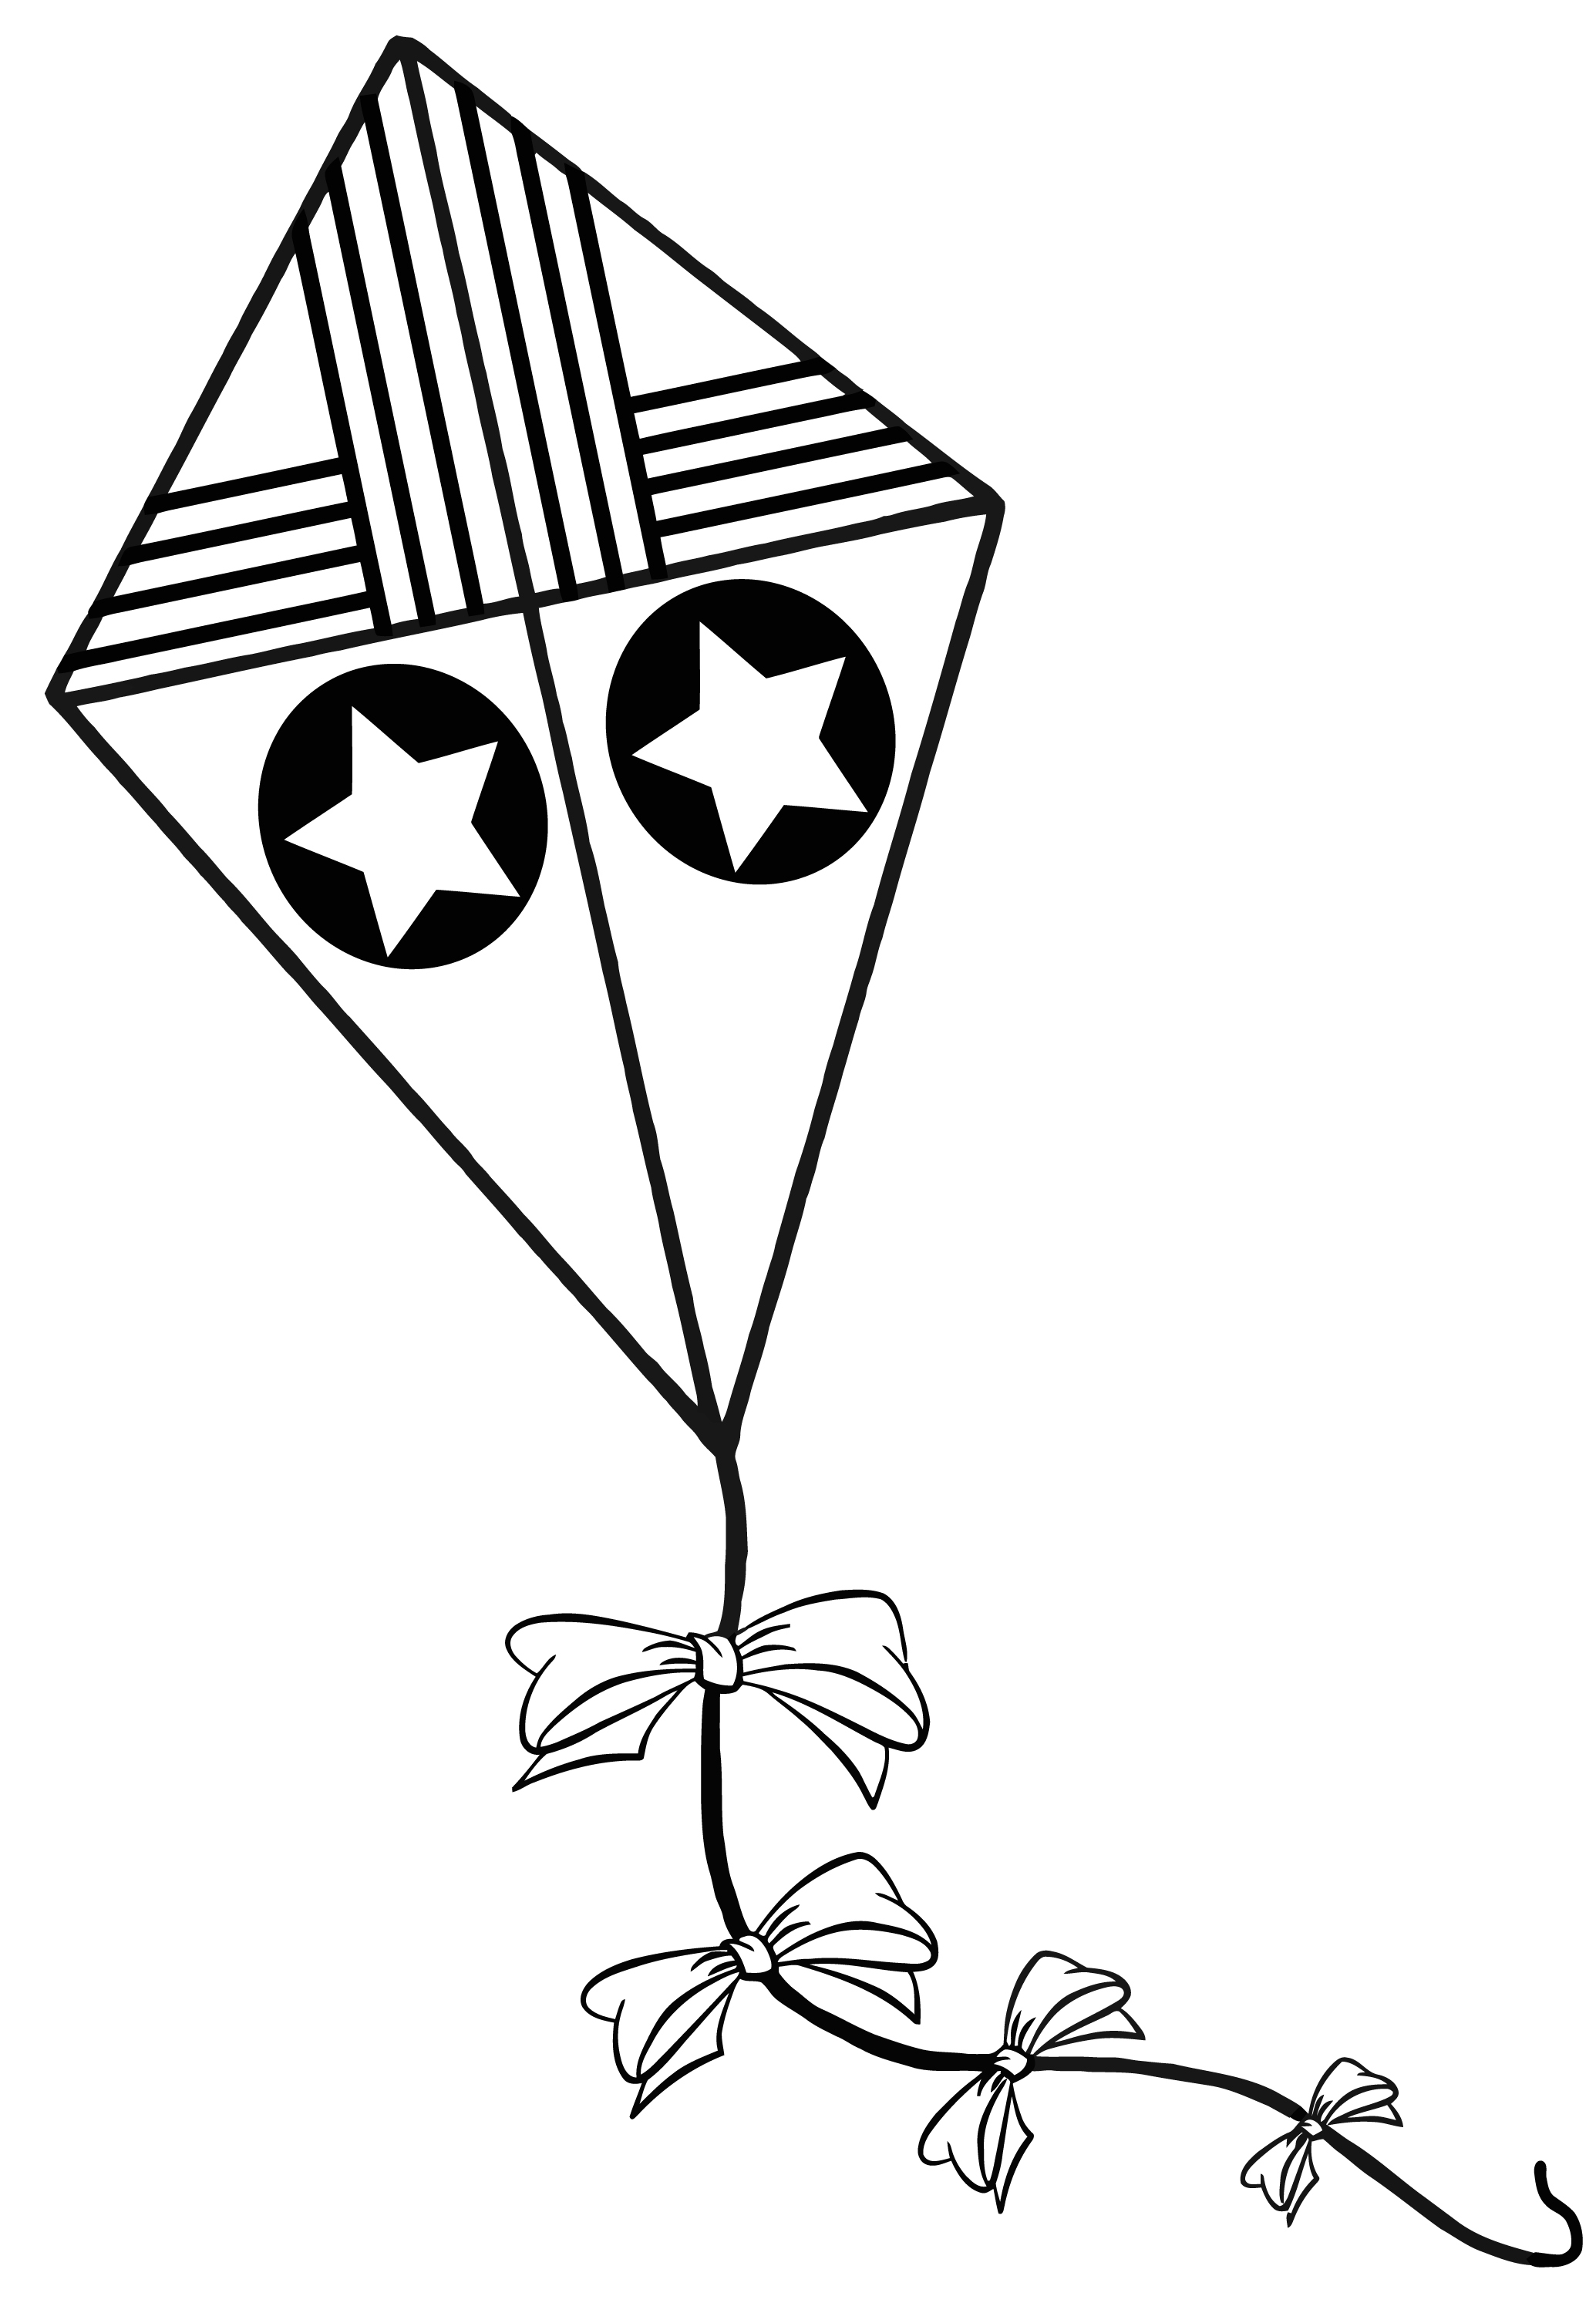 Coloring Pages : Colorings Pencil Printable Kite Drawing At - Free Printable Pencil Drawings